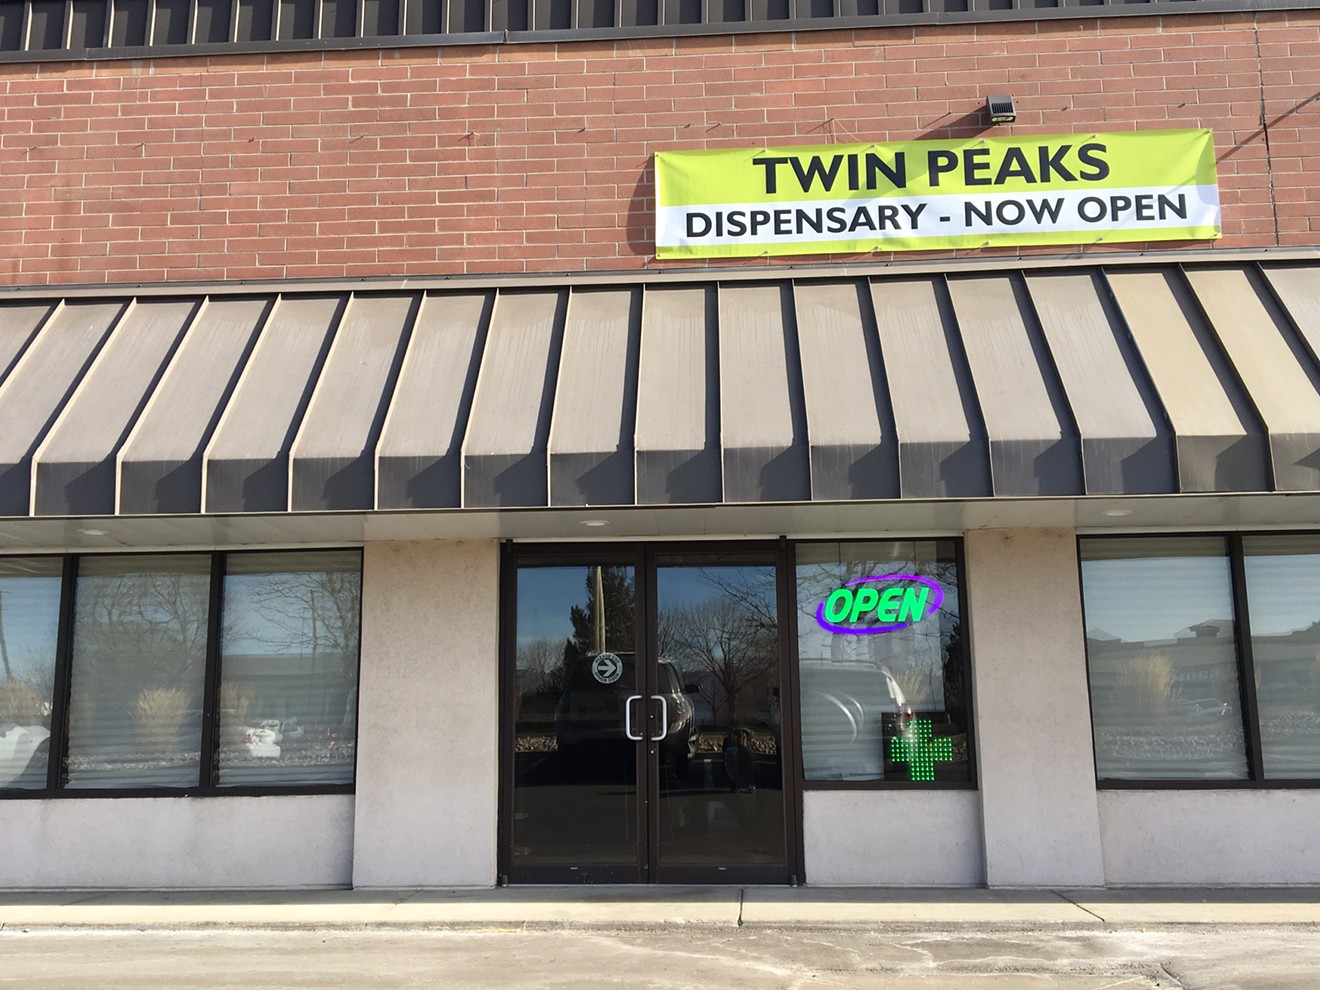 The dispensary is located in the Twin Peaks shopping center at 900 South Hover Street.